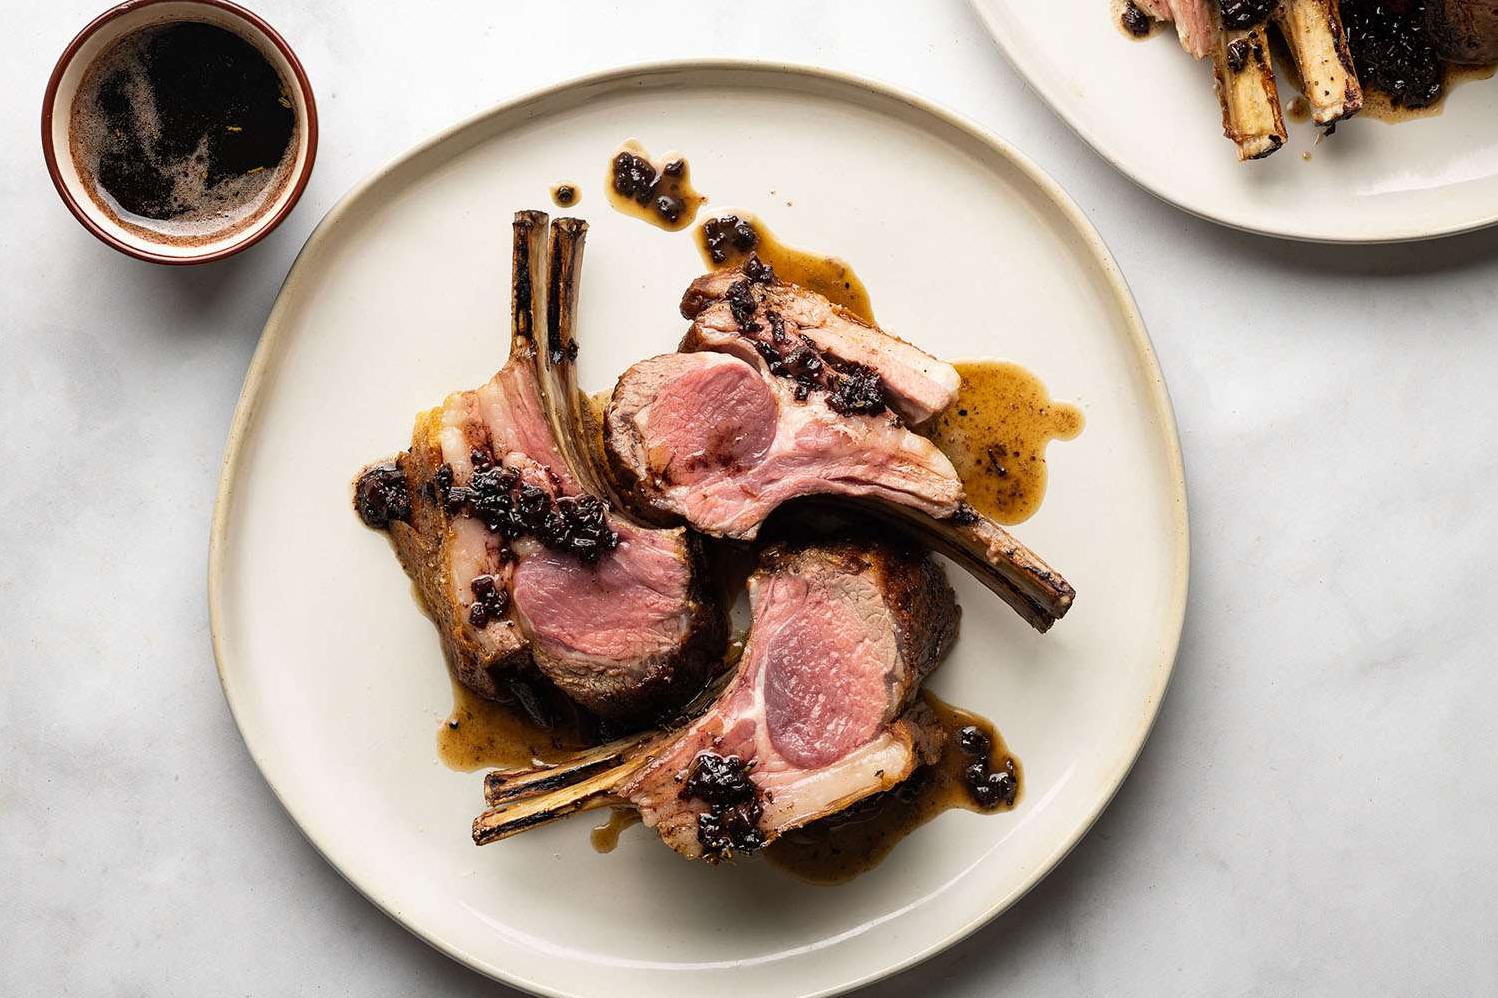  Impress your dinner guests with this elegant rack of lamb recipe